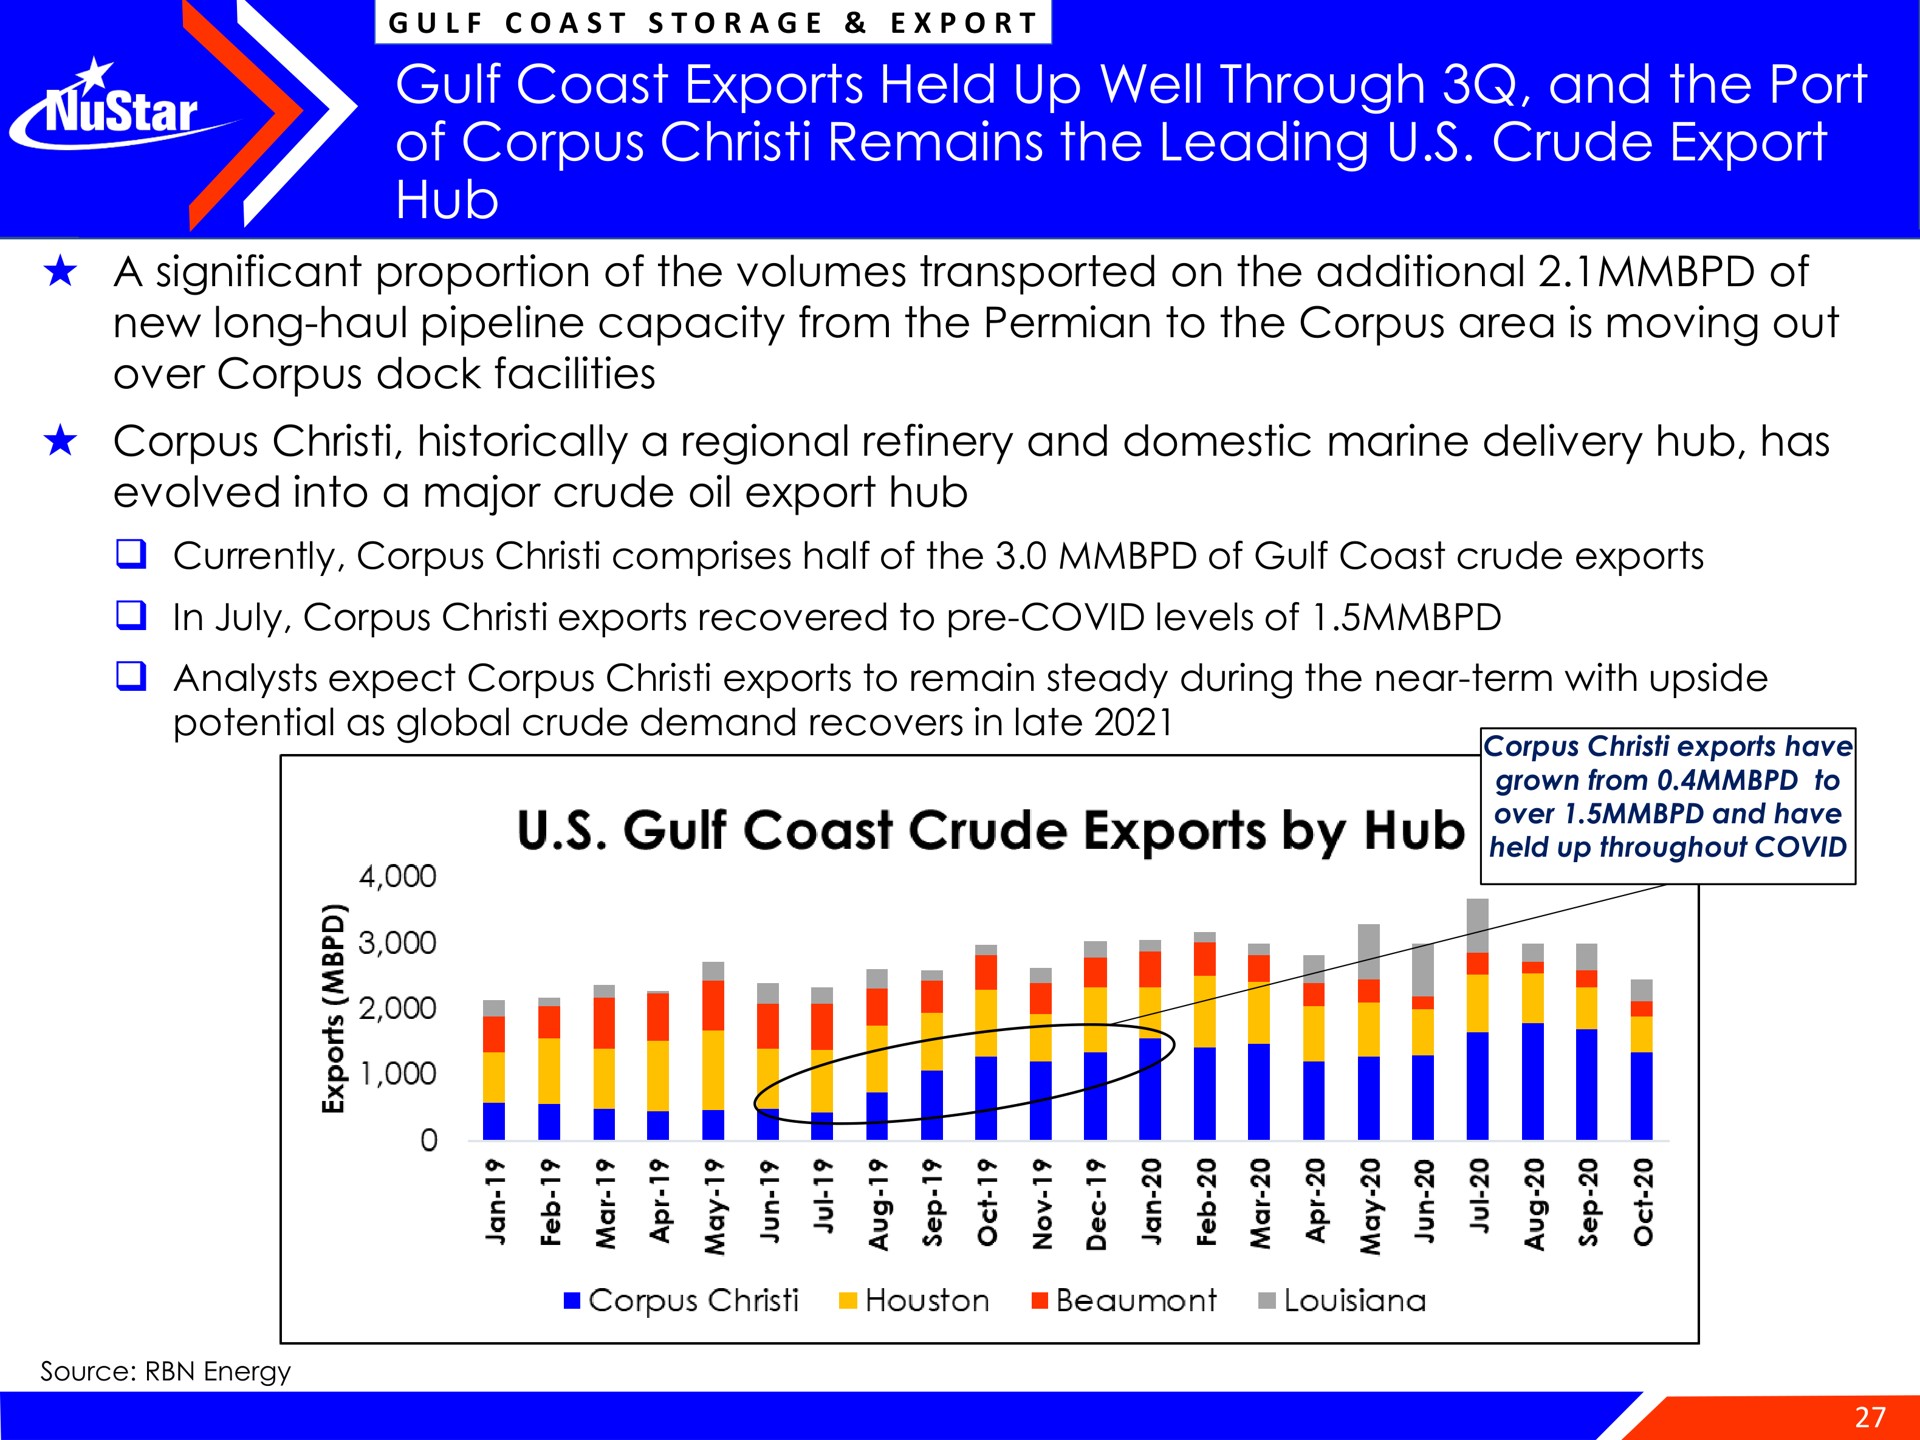 gulf coast exports held up well through and the port of corpus remains the leading crude export hub by | NuStar Energy